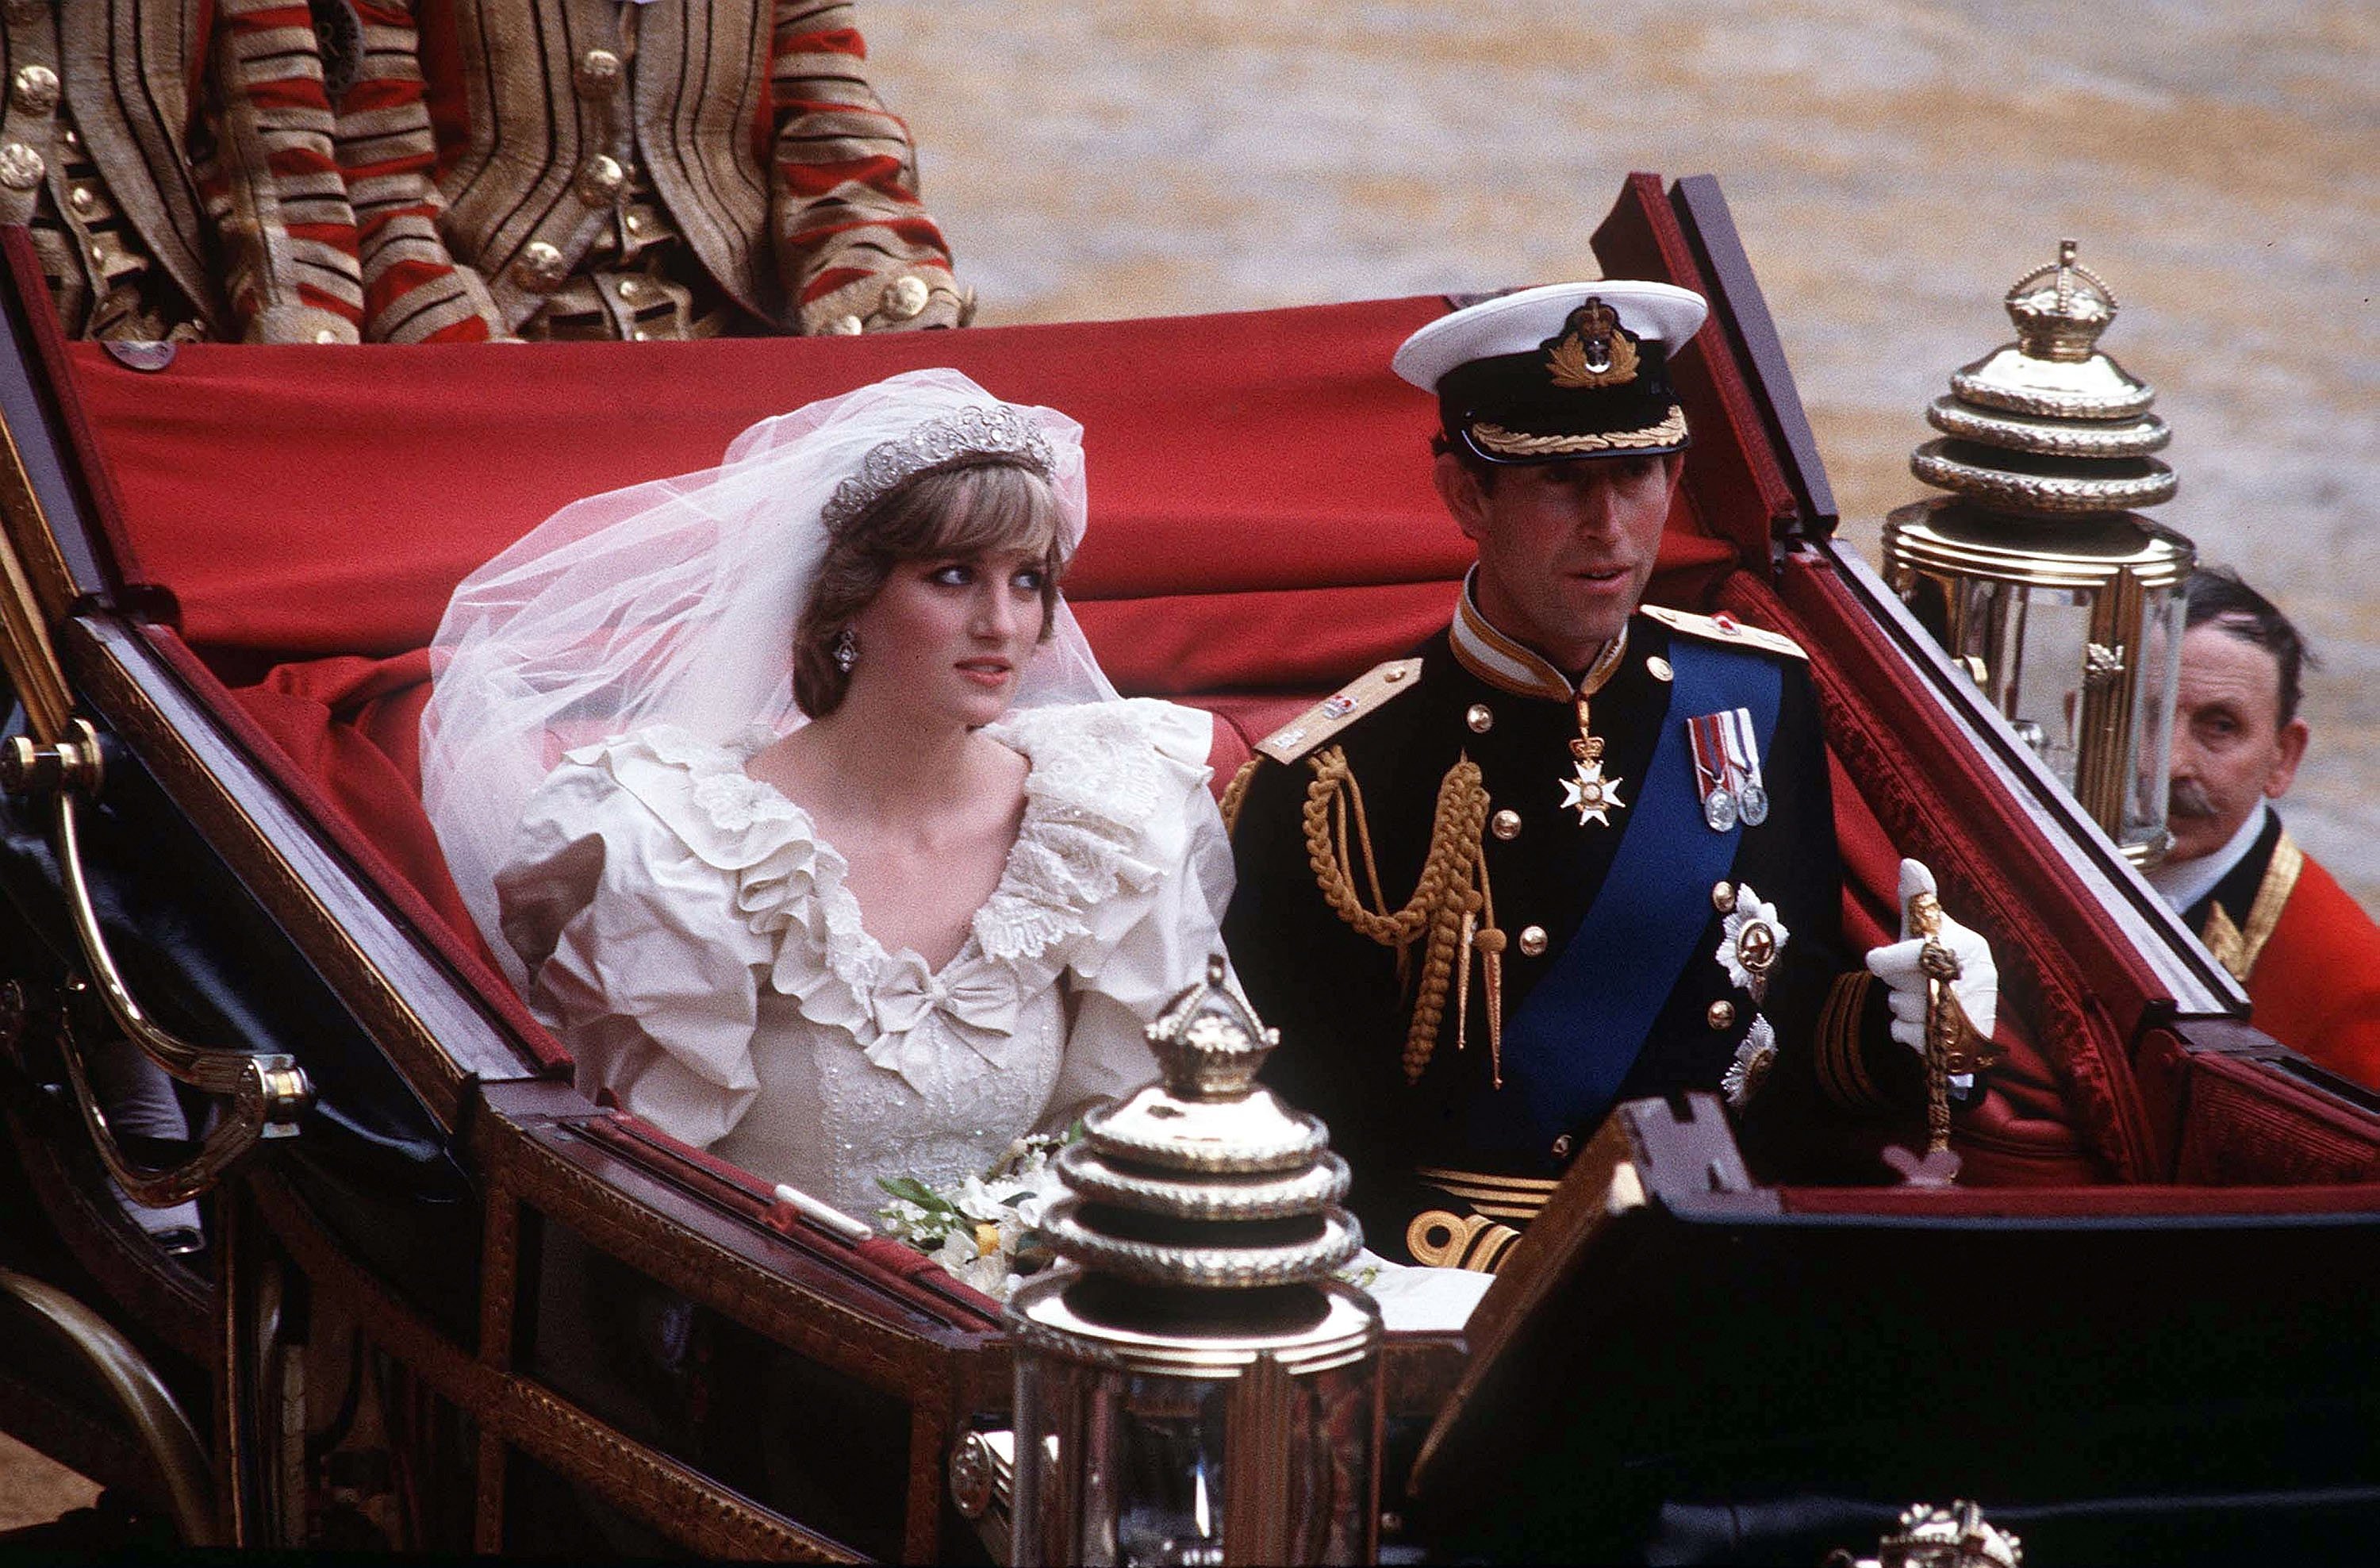  Diana, Princess of Wales and Prince Charles ride in a carriage after their wedding at St. Paul's Cathedral July 29, 1981, in London. | Source: Getty Images.